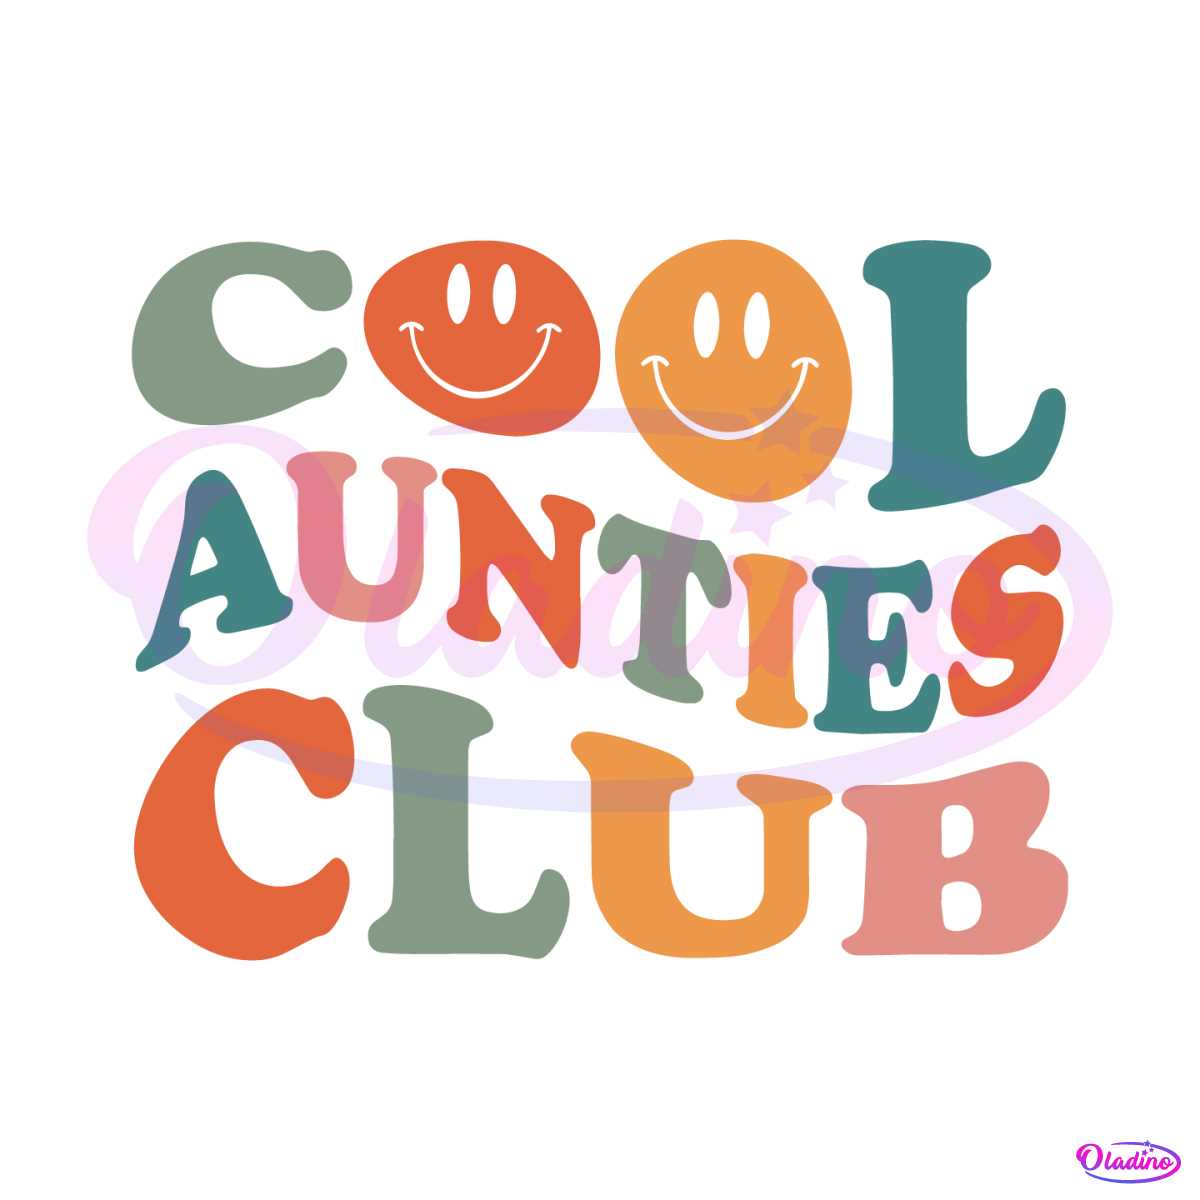 cool-aunties-club-svg-for-cricut-sublimation-files